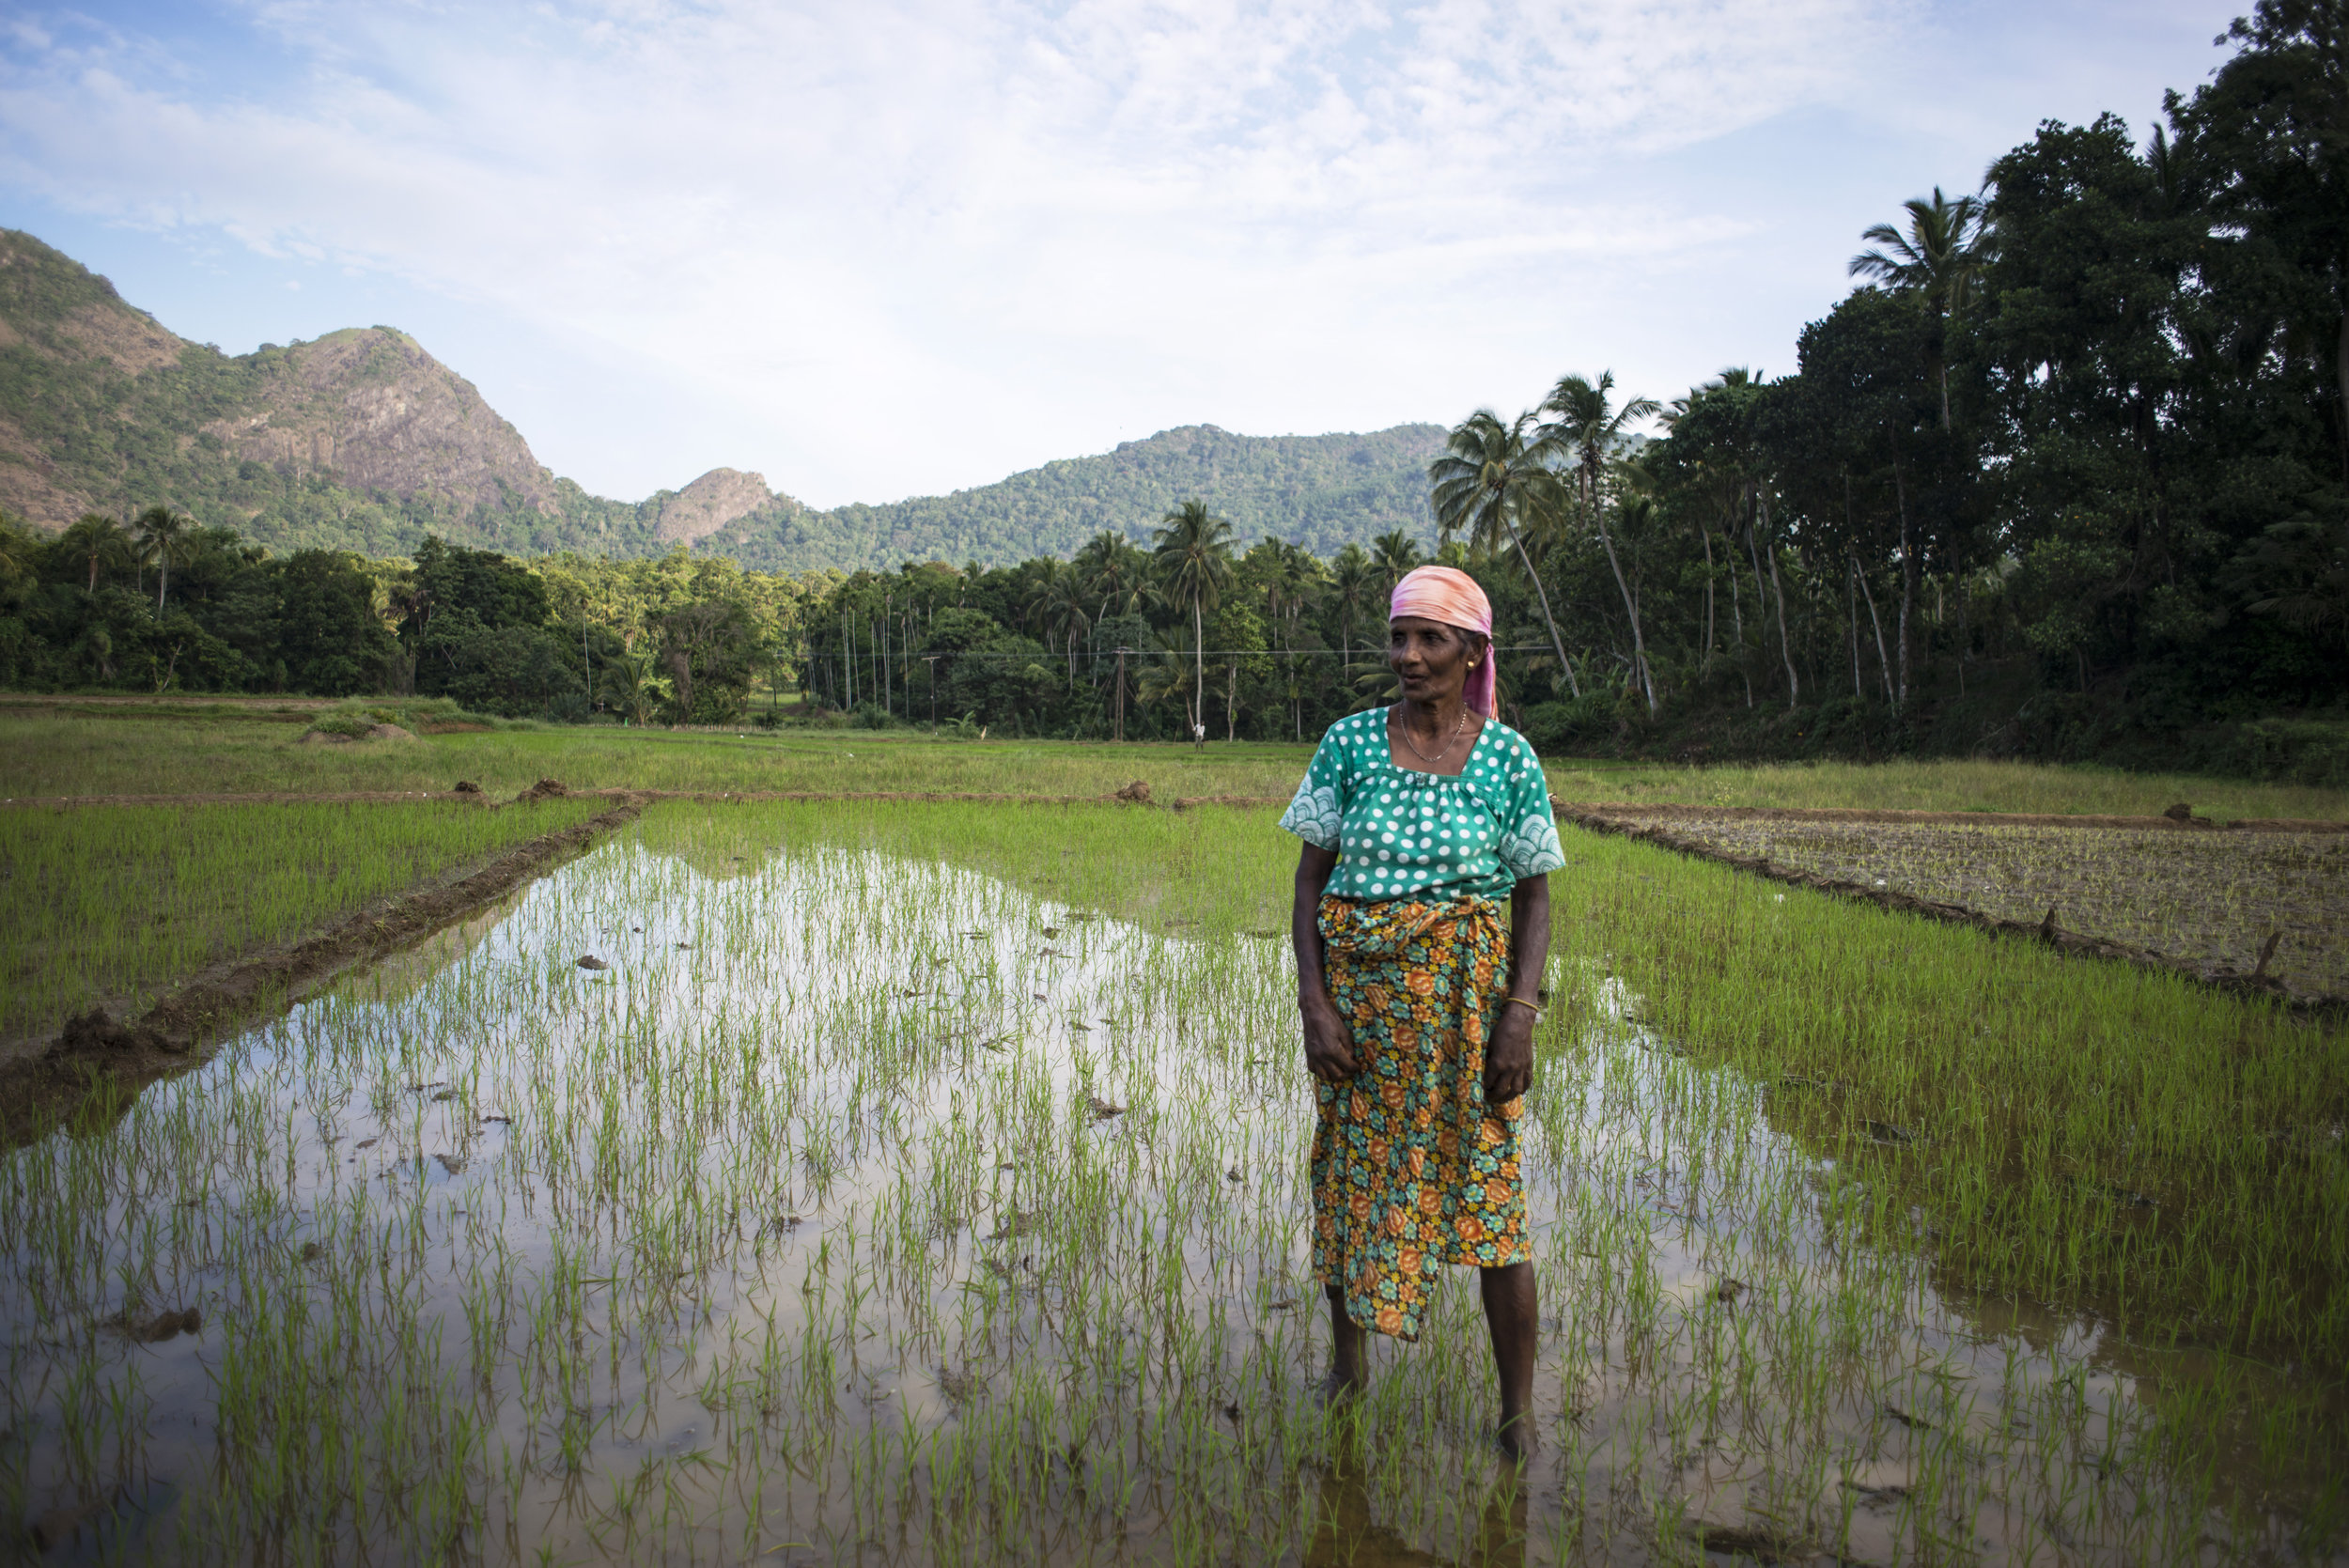  A rice picker in Unaweruwa takes brief break from seed transplanting, a method used in many Southeast Asian rice cultivation systems. 